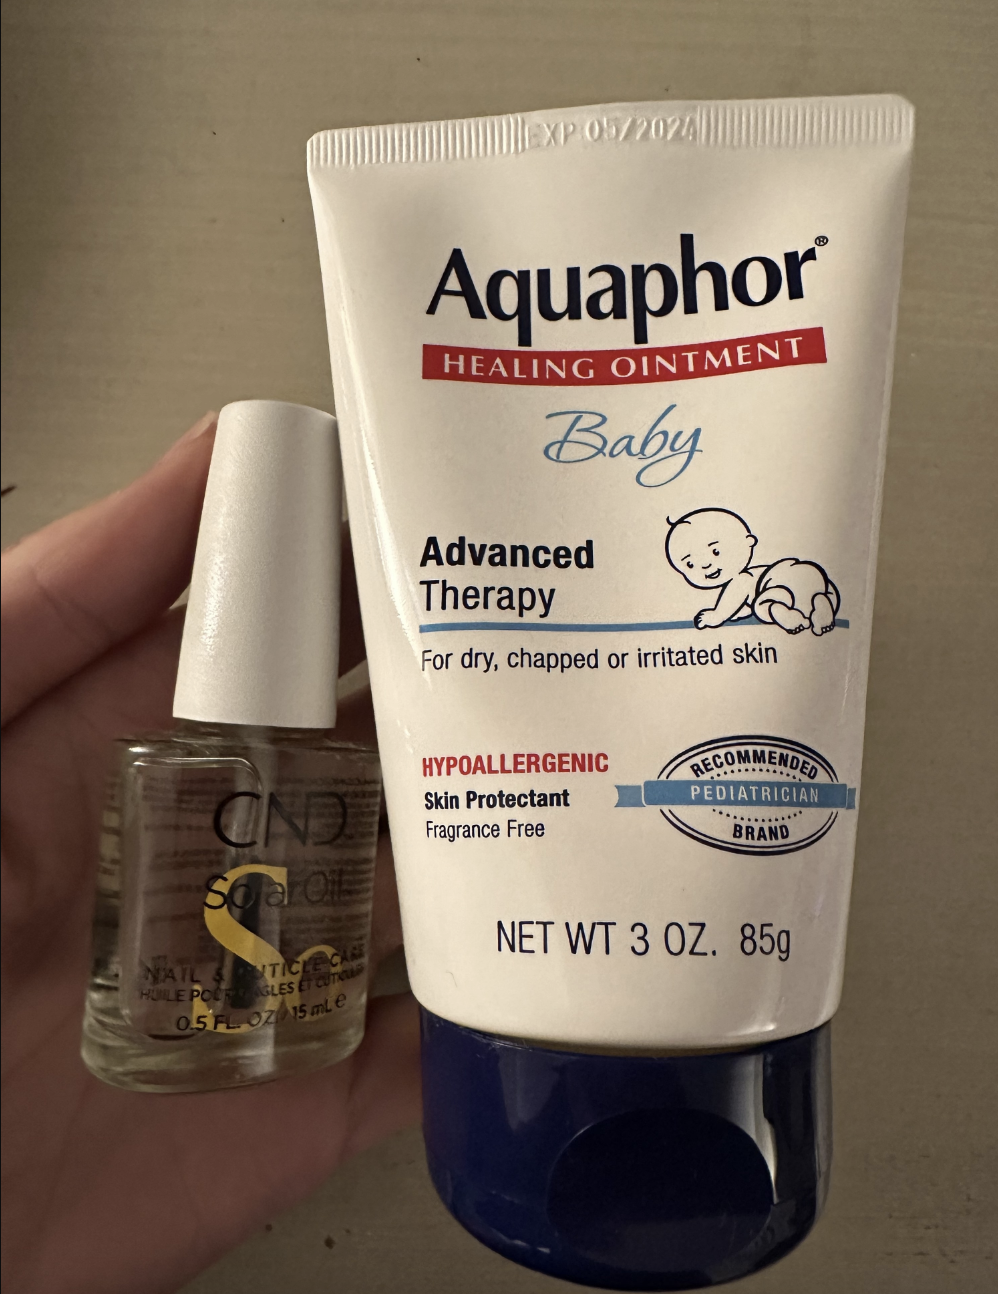 a picture of cuticle oil and aquaphor